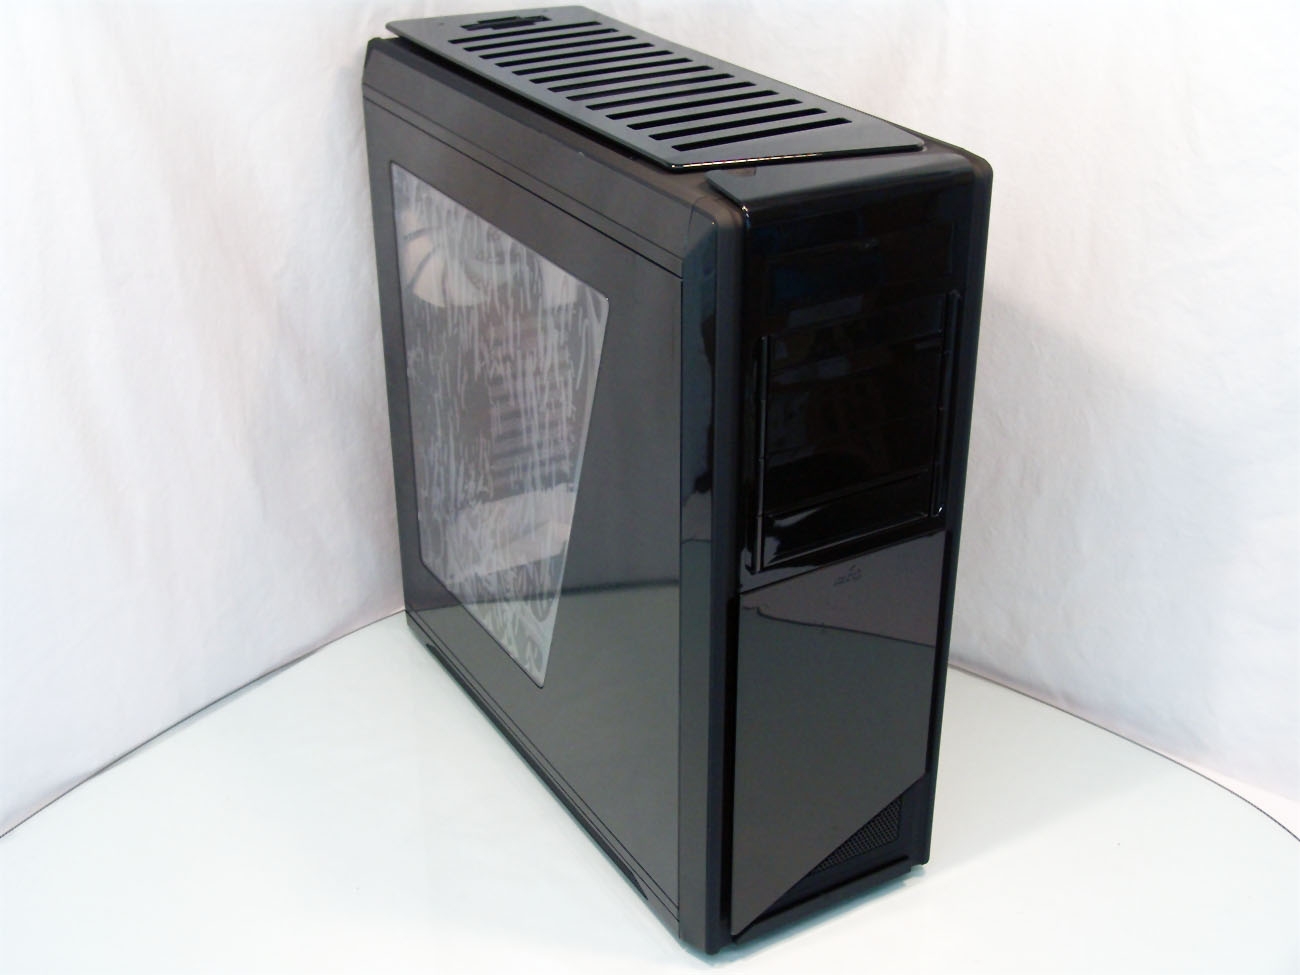 NZXT Switch 810 Full Tower Case Review